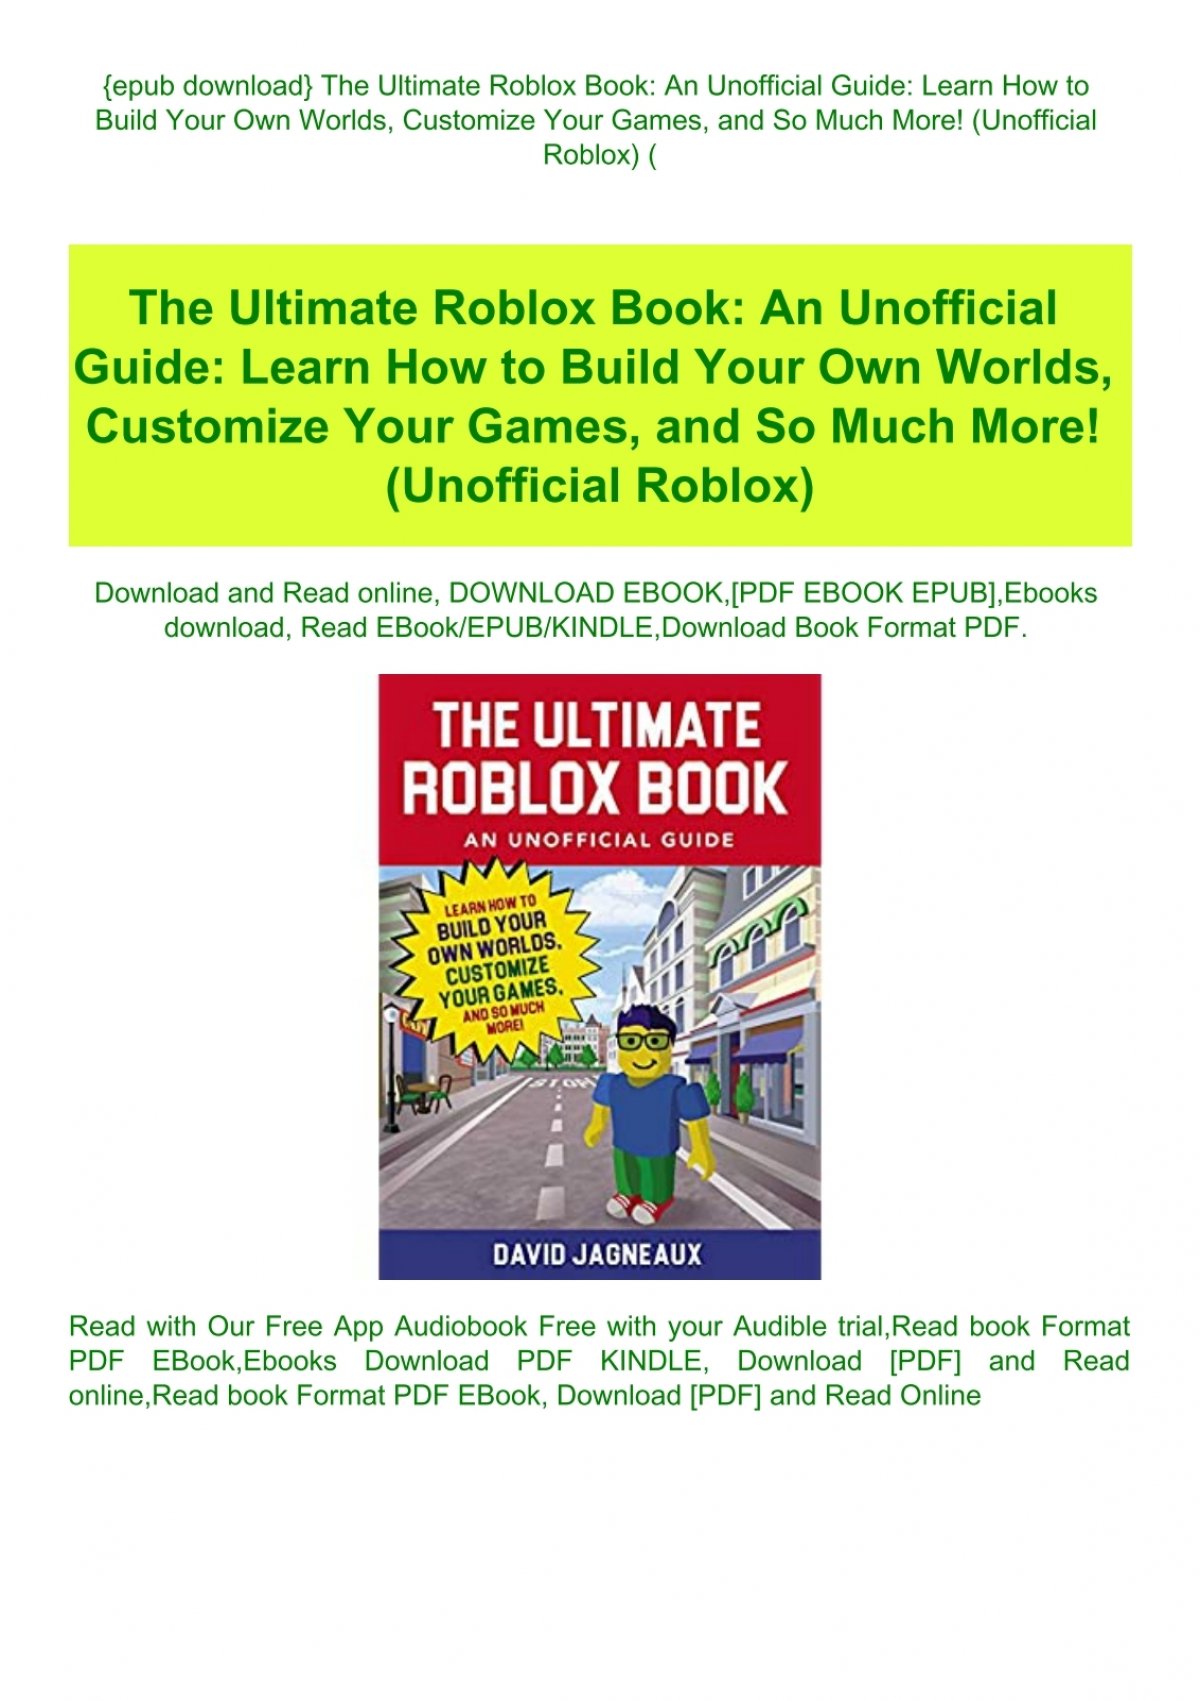 Epub Download The Ultimate Roblox Book An Unofficial Guide Learn How To Build Your Own Worlds Customize Your Games And So Much More Unofficial Roblox E B O O K Download - the advanced roblox coding book an unofficial guide ebook by